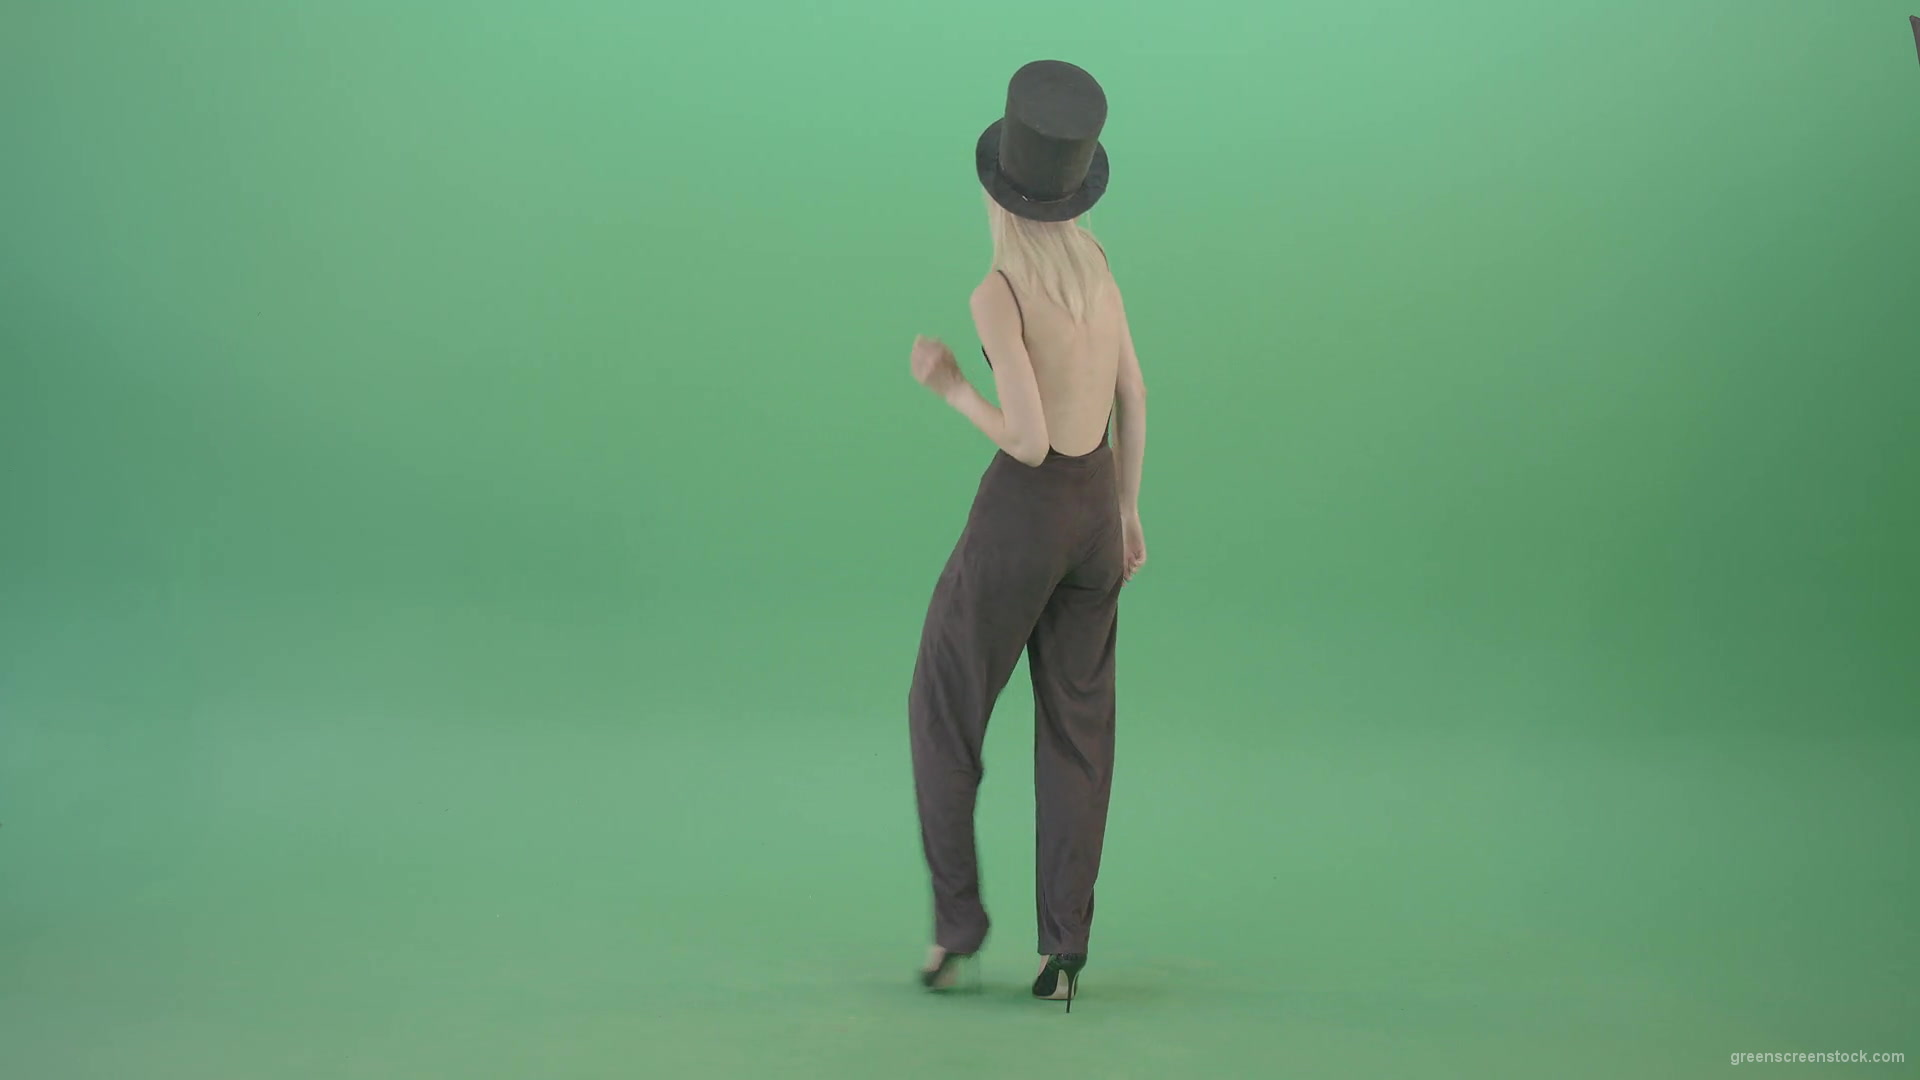 Covid-Mask-Girl-in-Black-cylinder-Hat-dancing-in-front-and-back-side-view-isolated-on-green-screen-Video-Footage-1920_007 Green Screen Stock